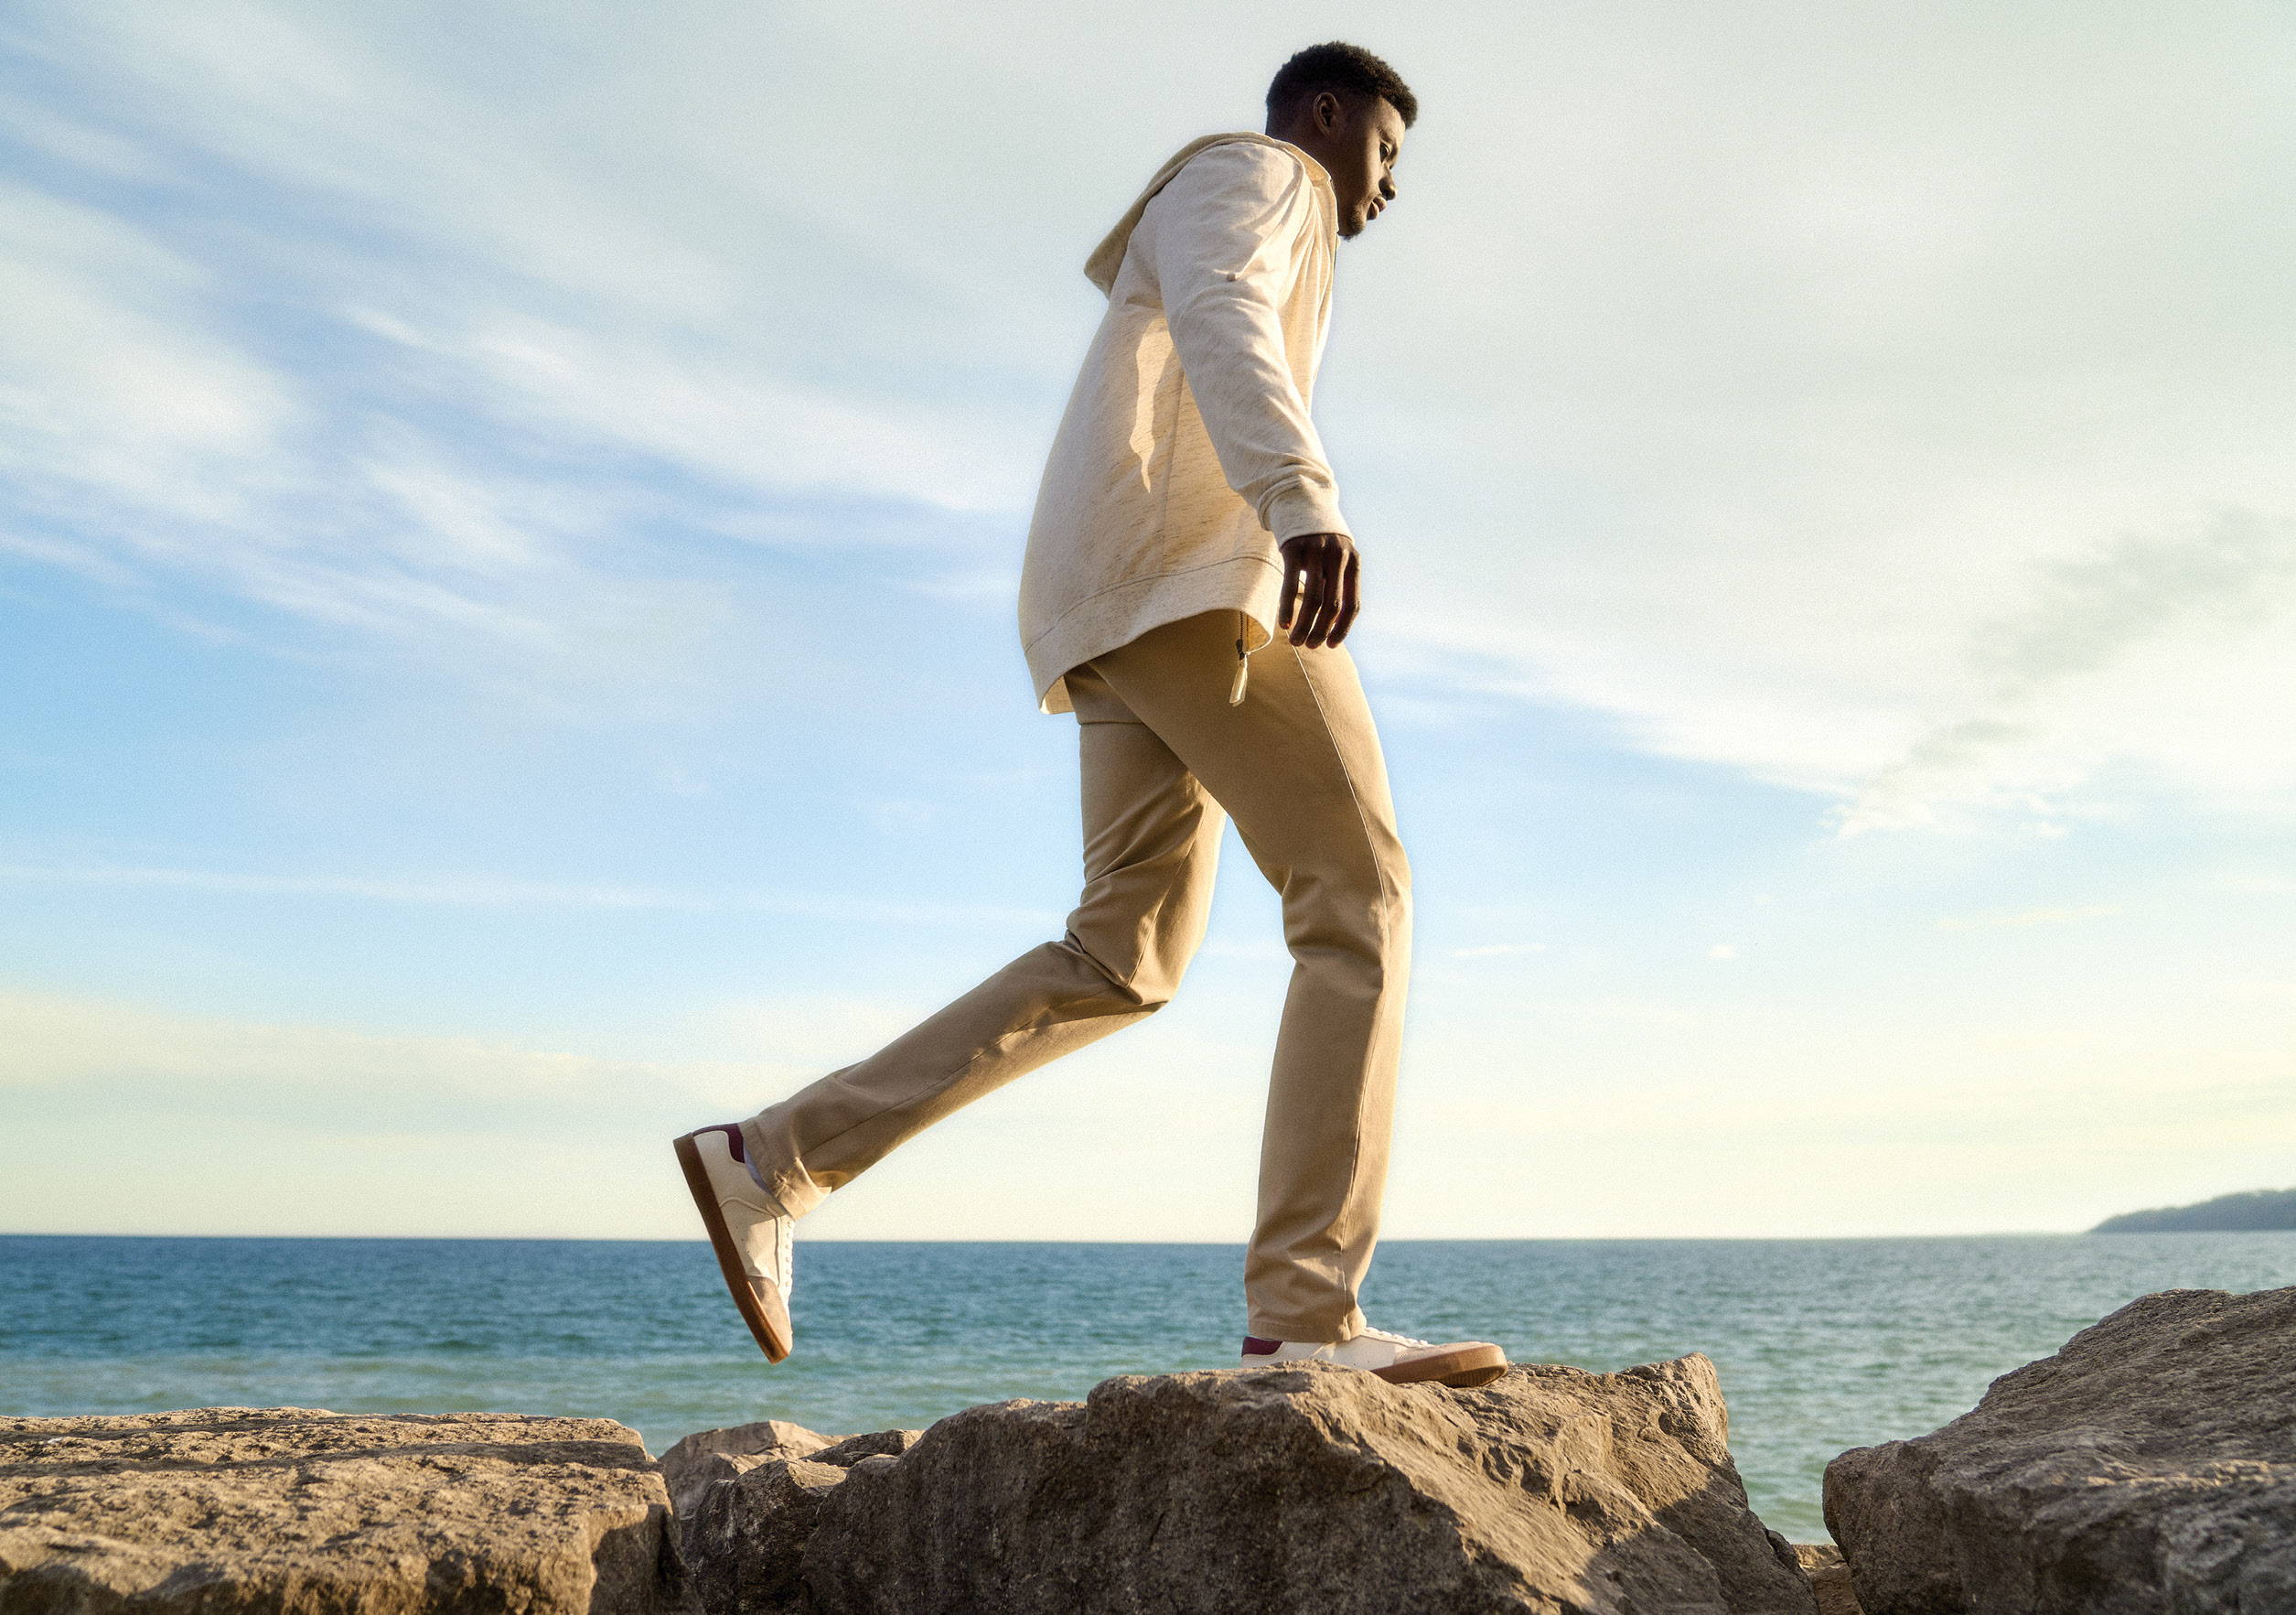 Tall man walking on rocks by the water wearing a beige sweater and khaki pants